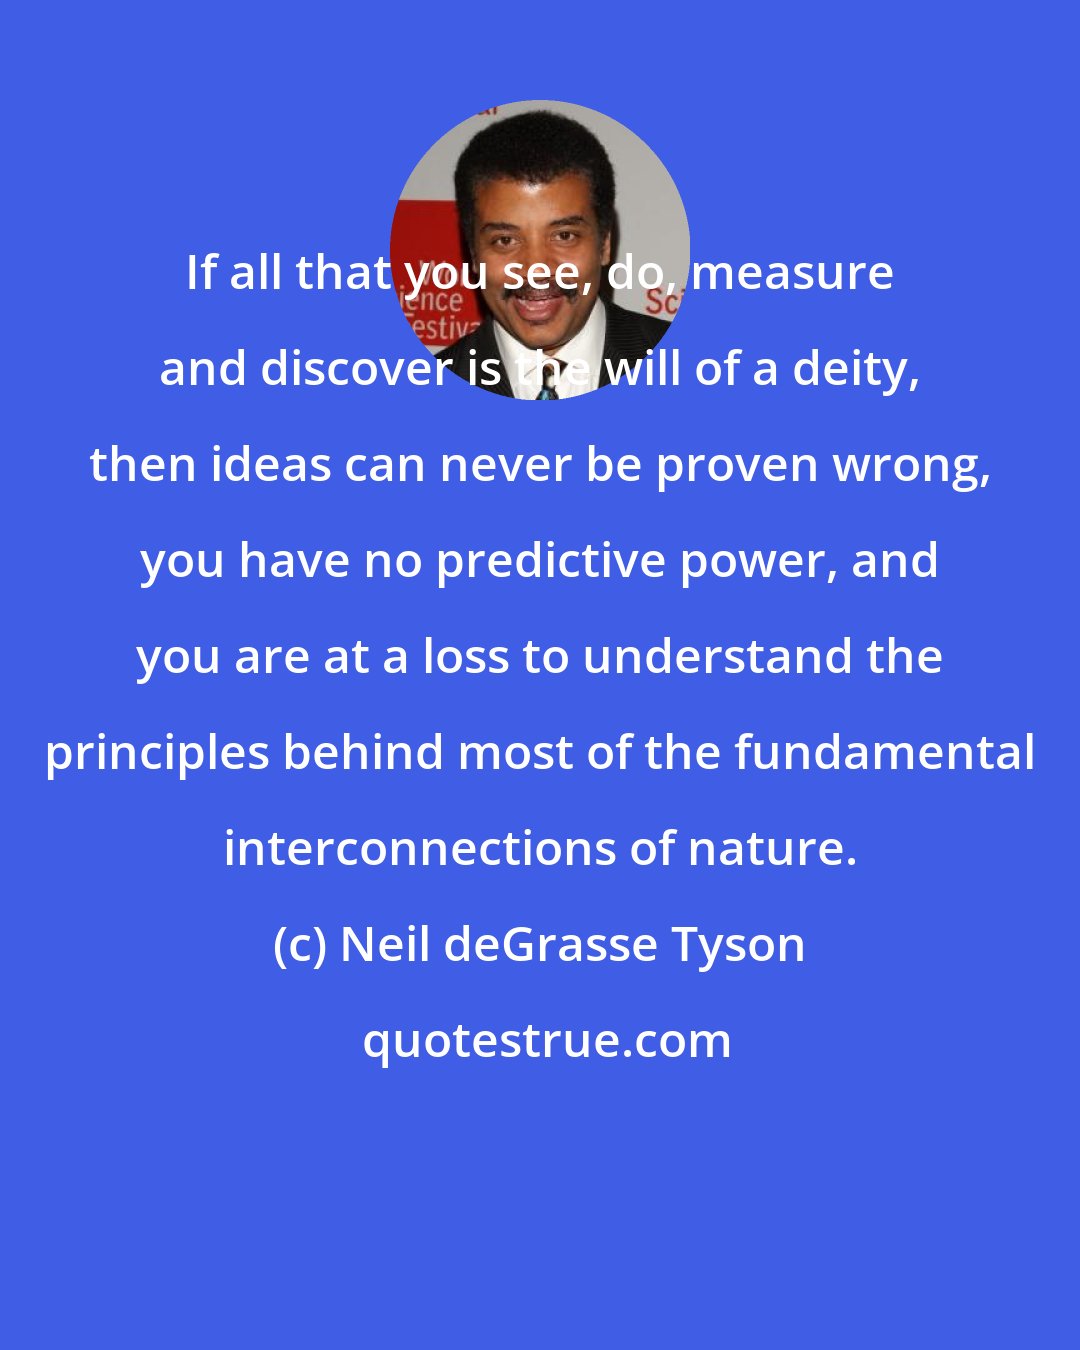 Neil deGrasse Tyson: If all that you see, do, measure and discover is the will of a deity, then ideas can never be proven wrong, you have no predictive power, and you are at a loss to understand the principles behind most of the fundamental interconnections of nature.